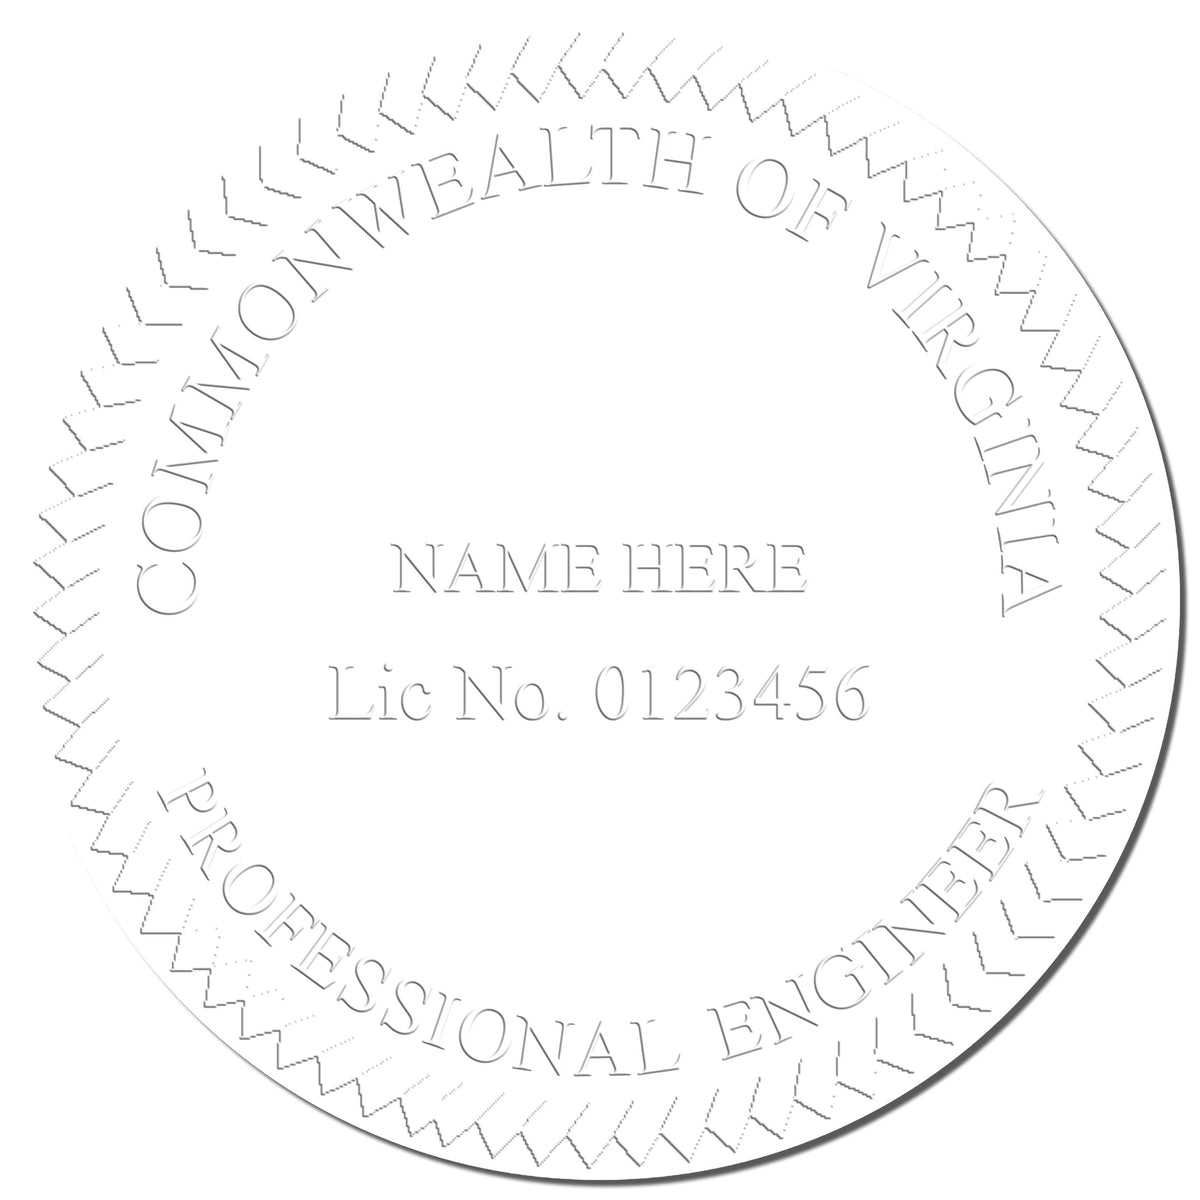 This paper is stamped with a sample imprint of the State of Virginia Extended Long Reach Engineer Seal, signifying its quality and reliability.